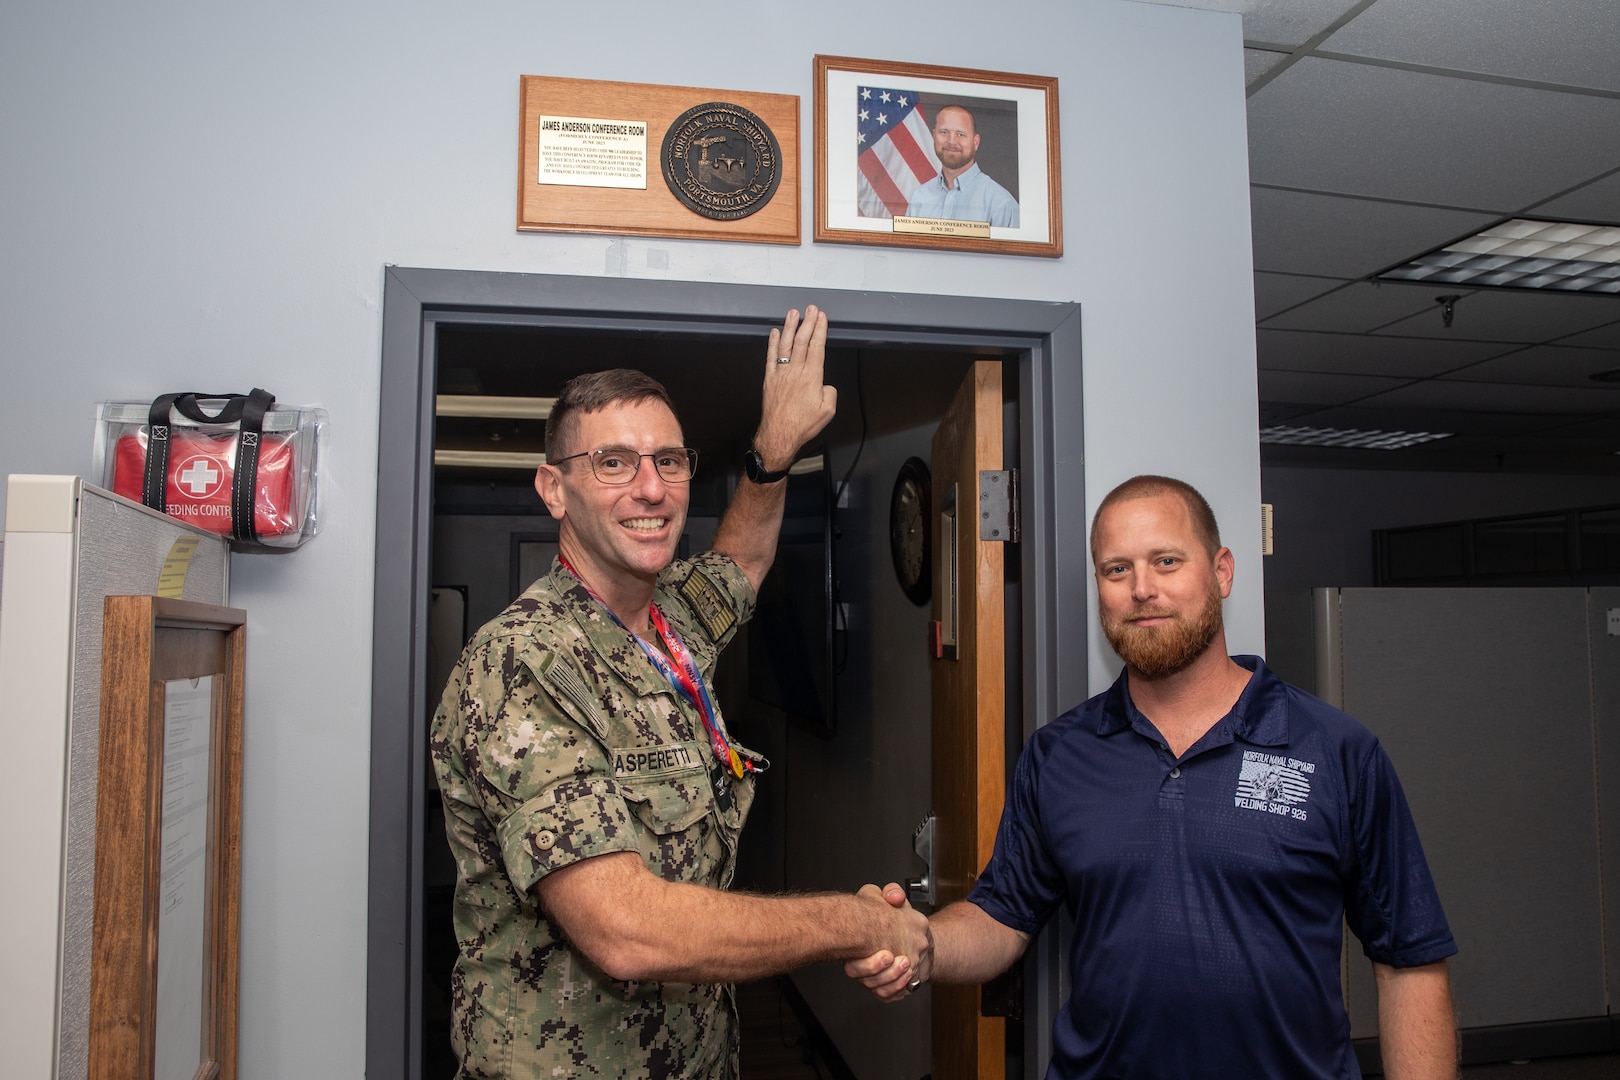 Norfolk Naval Shipyard's Code 900 Production Resource Officer, Capt. Frank Gasperetti, congratulated Code 926 Workforce Development Lead Mr. James Anderson for receiving the honor to have the Production Resource Office conference room named after him for the month of June 2023. Anderson was chosen because of his passion for building an effective workforce development program and his commitment to building and improving the program for Code 926 and all the trades in Code 900.